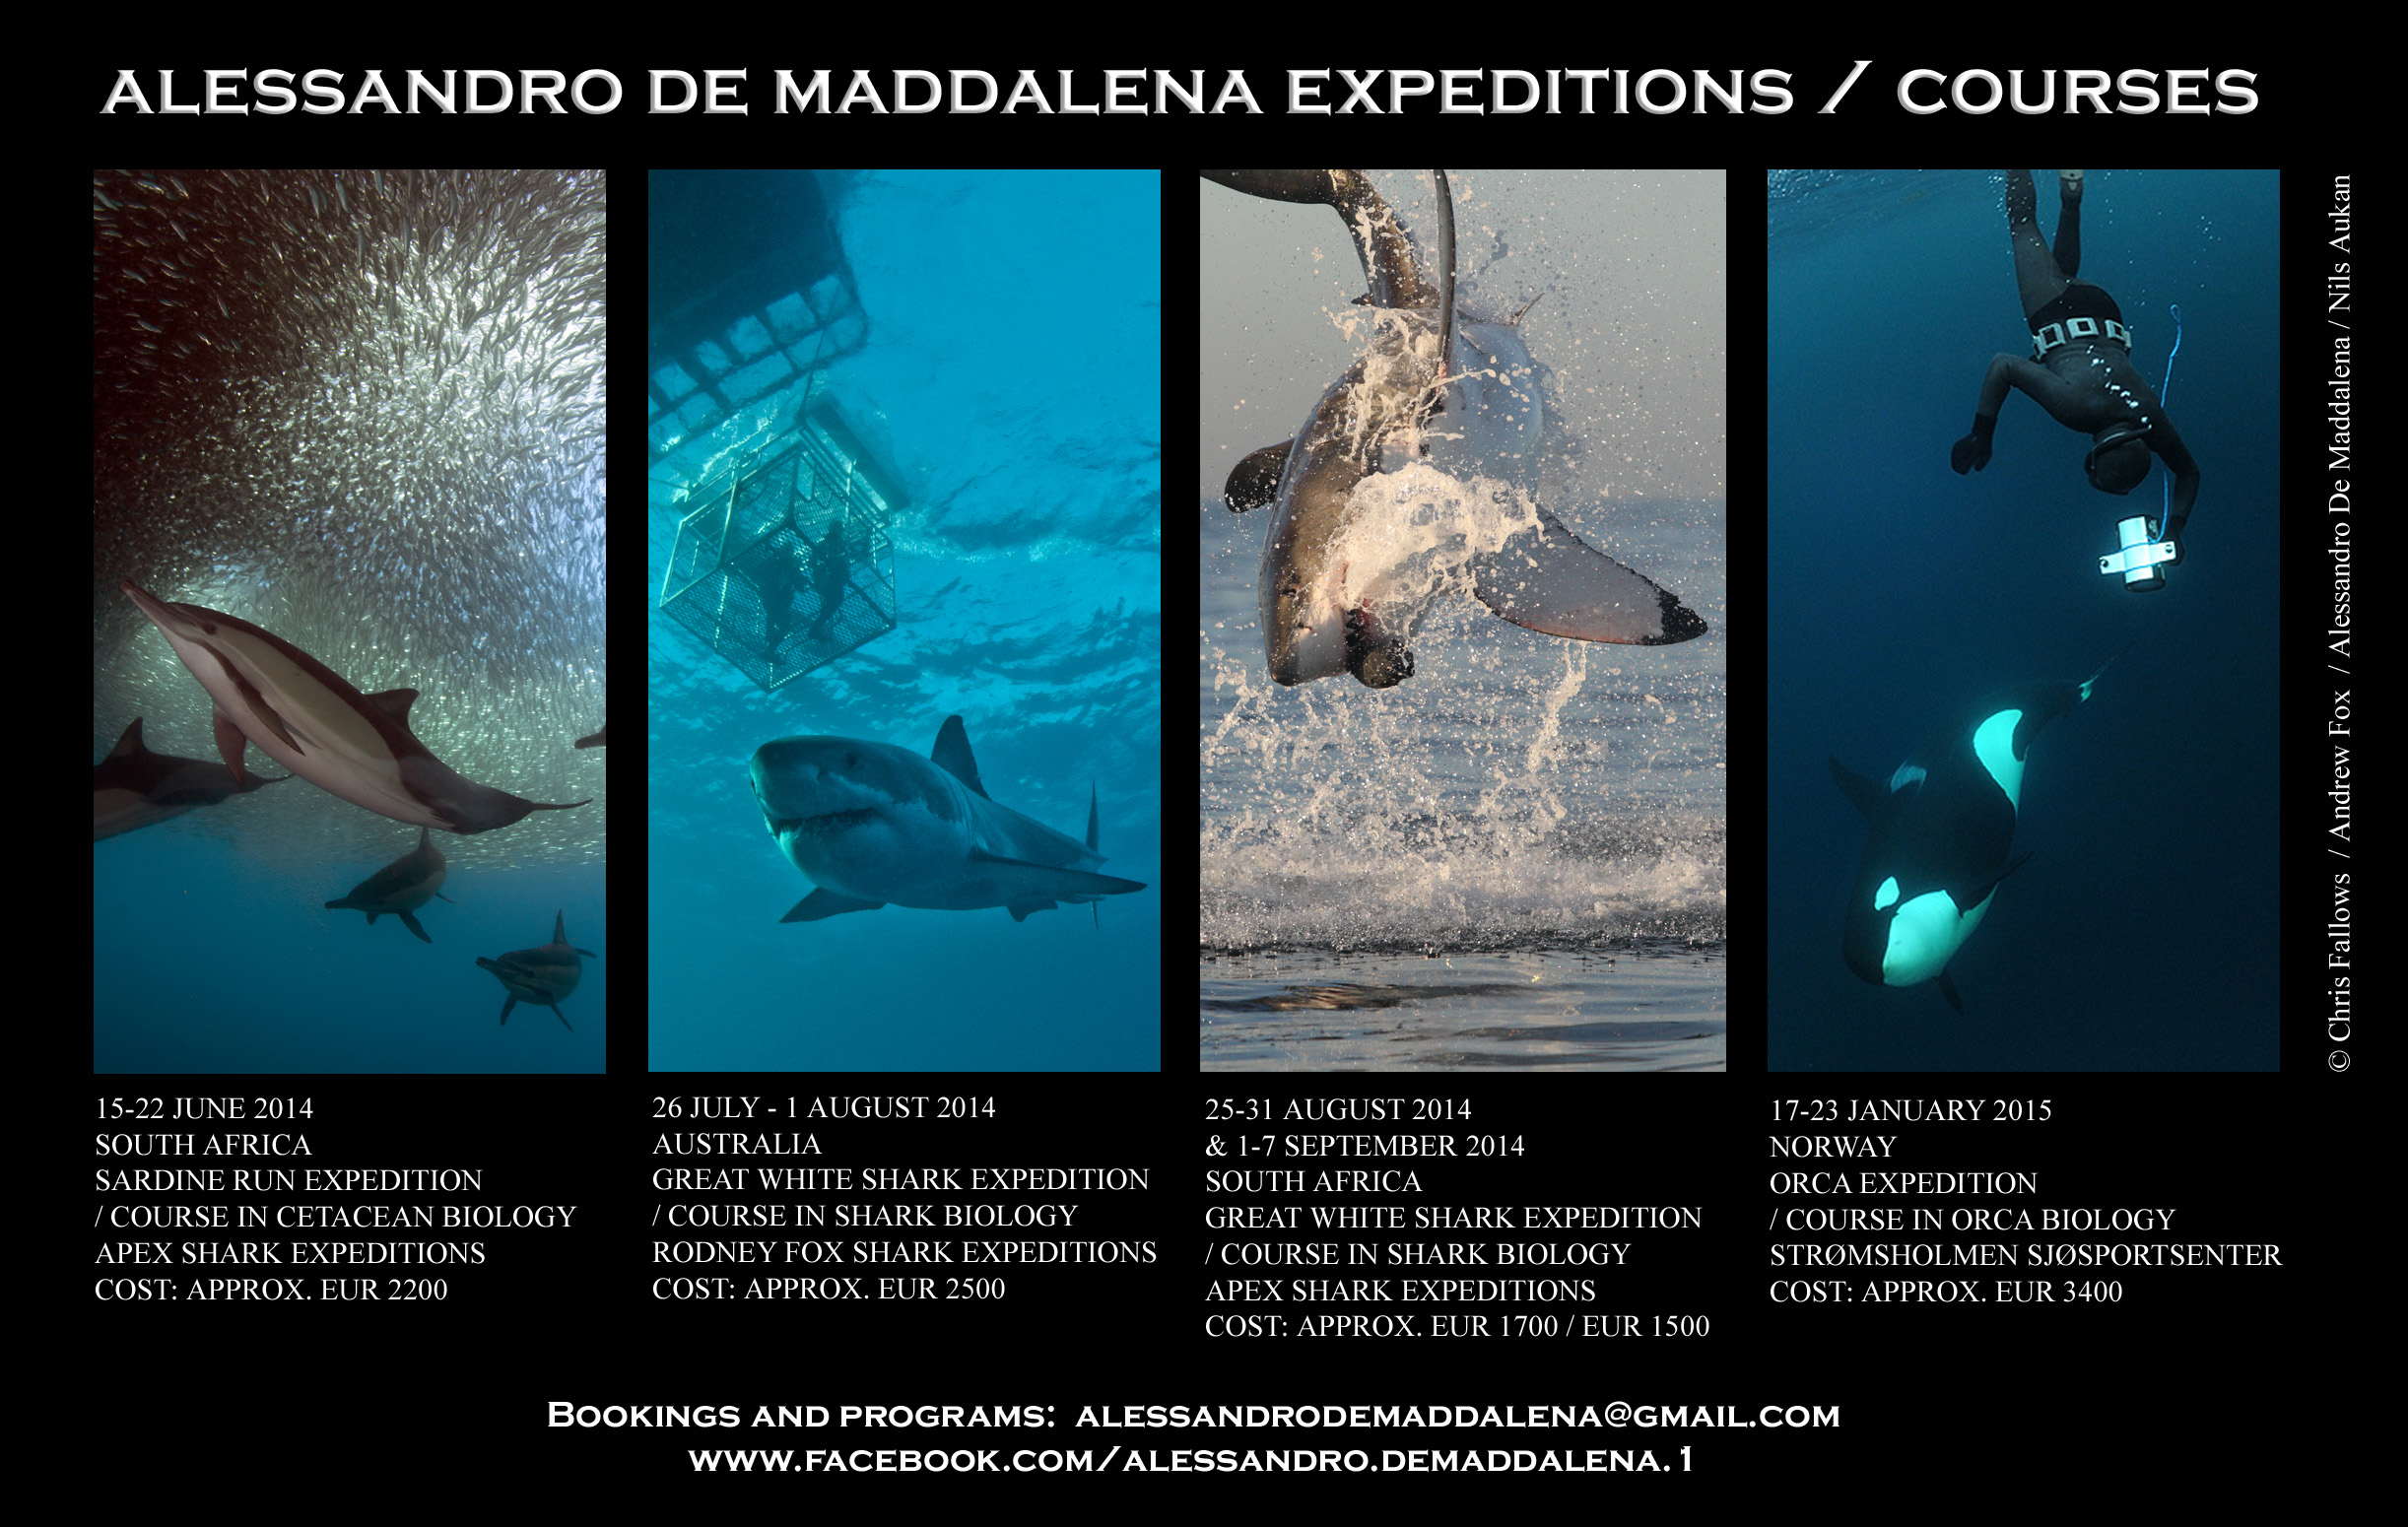 NEXT EXPEDITIONS / COURSES: GREAT WHITE SHARKS, ORCAS, SARDINE RUN